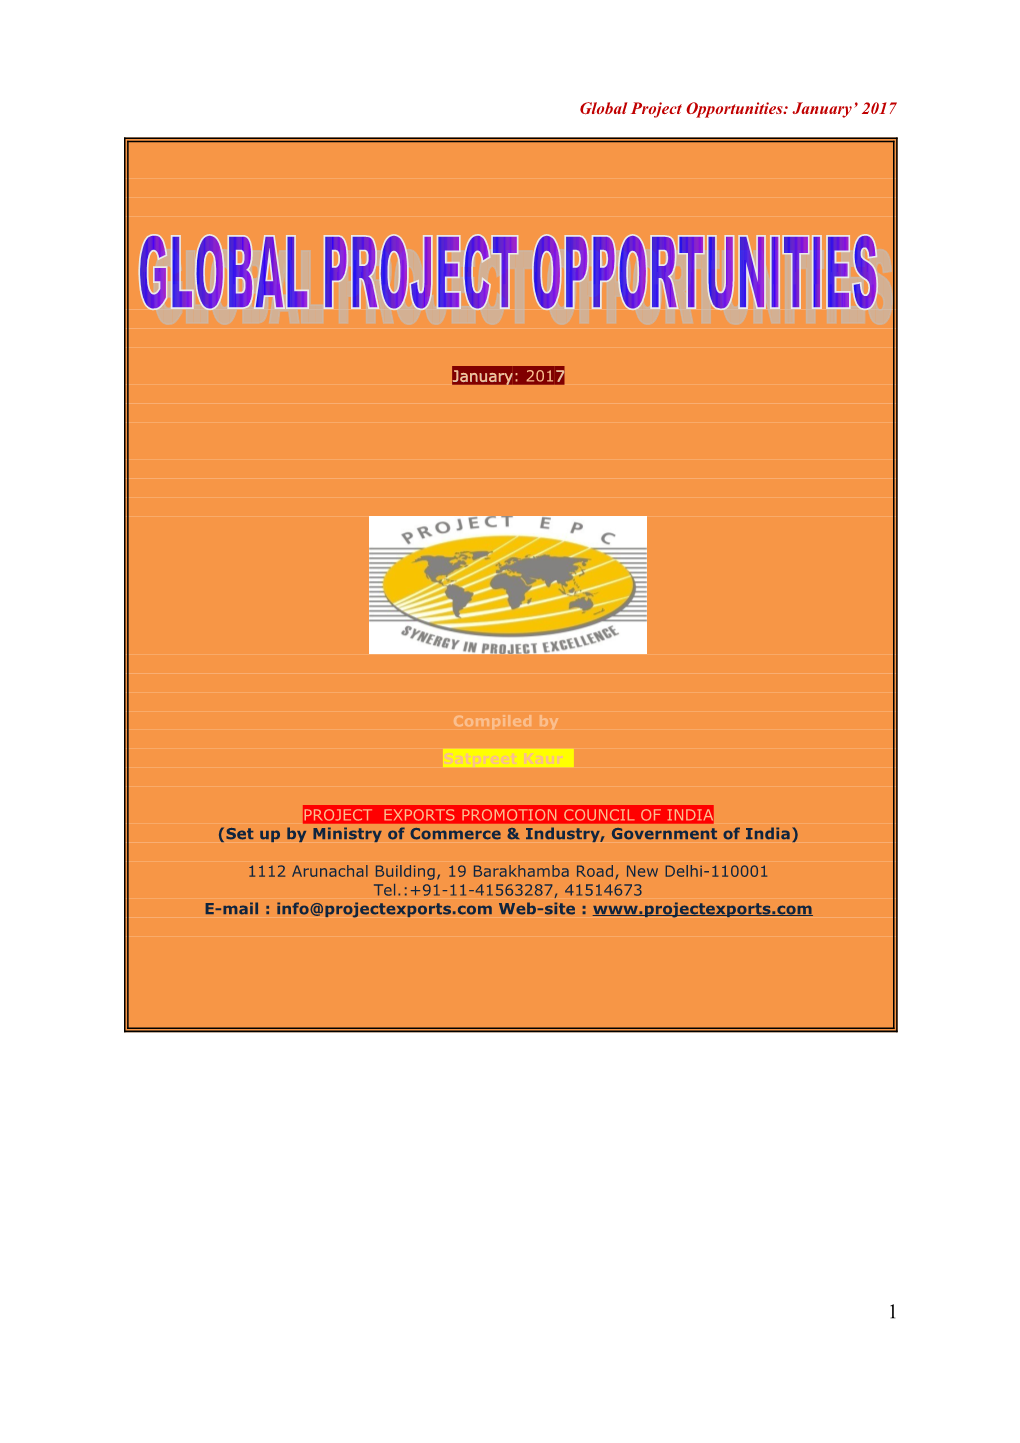 Global Project Opportunities: January 2017